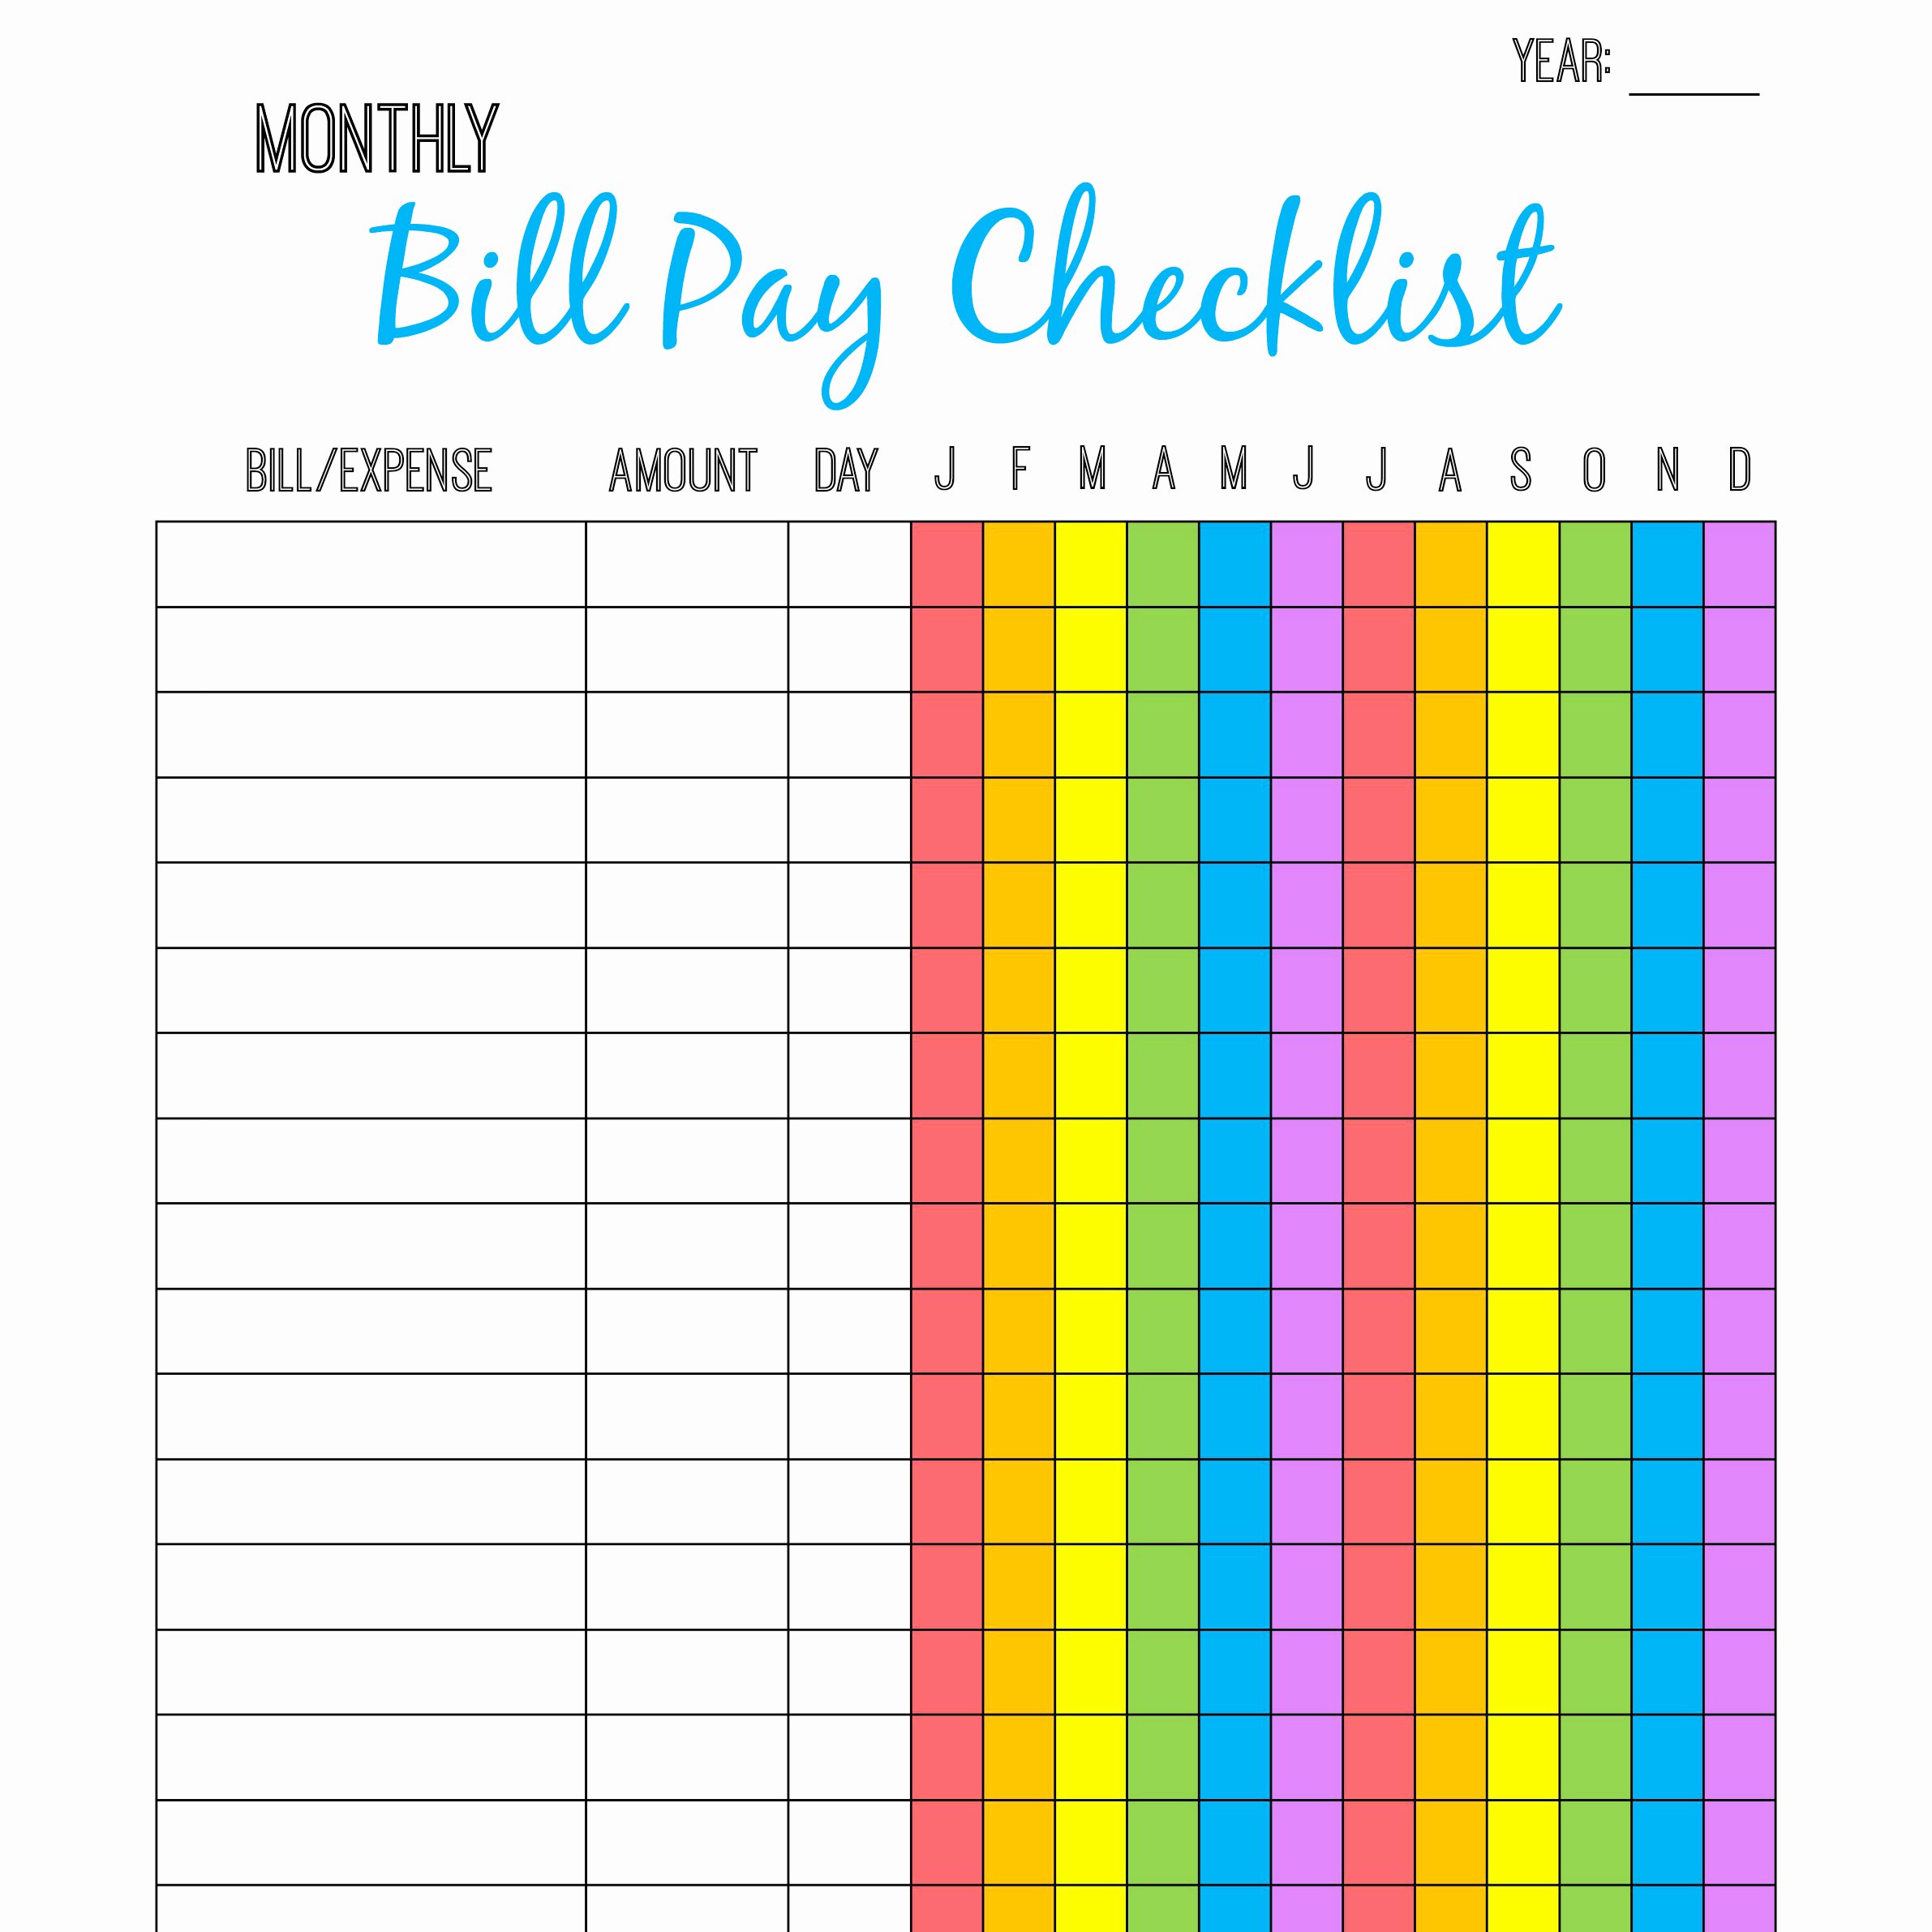 Bill Pay Checklist Template Elegant Monthly Bill Pay Checklist Free Printable the